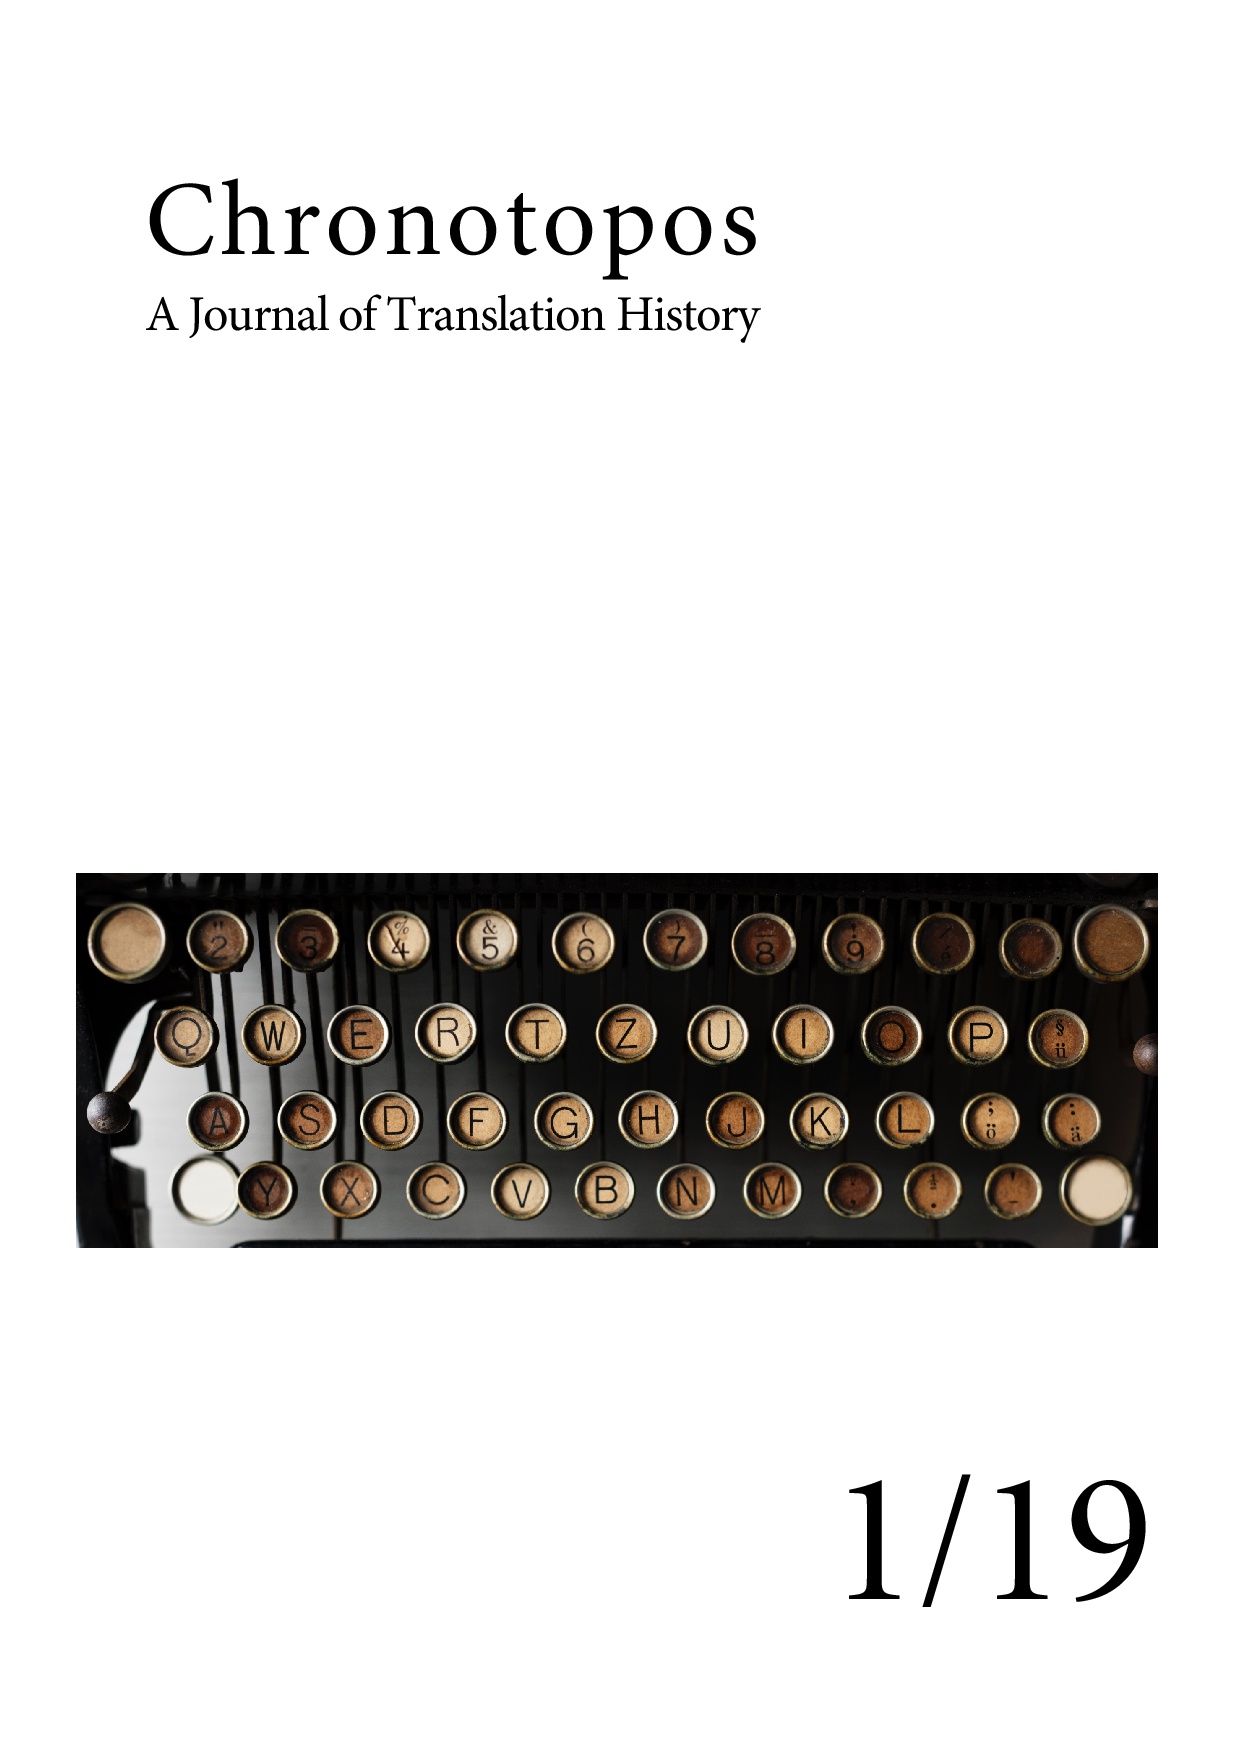 cover of first issue of chronotopos, a journal of translation history